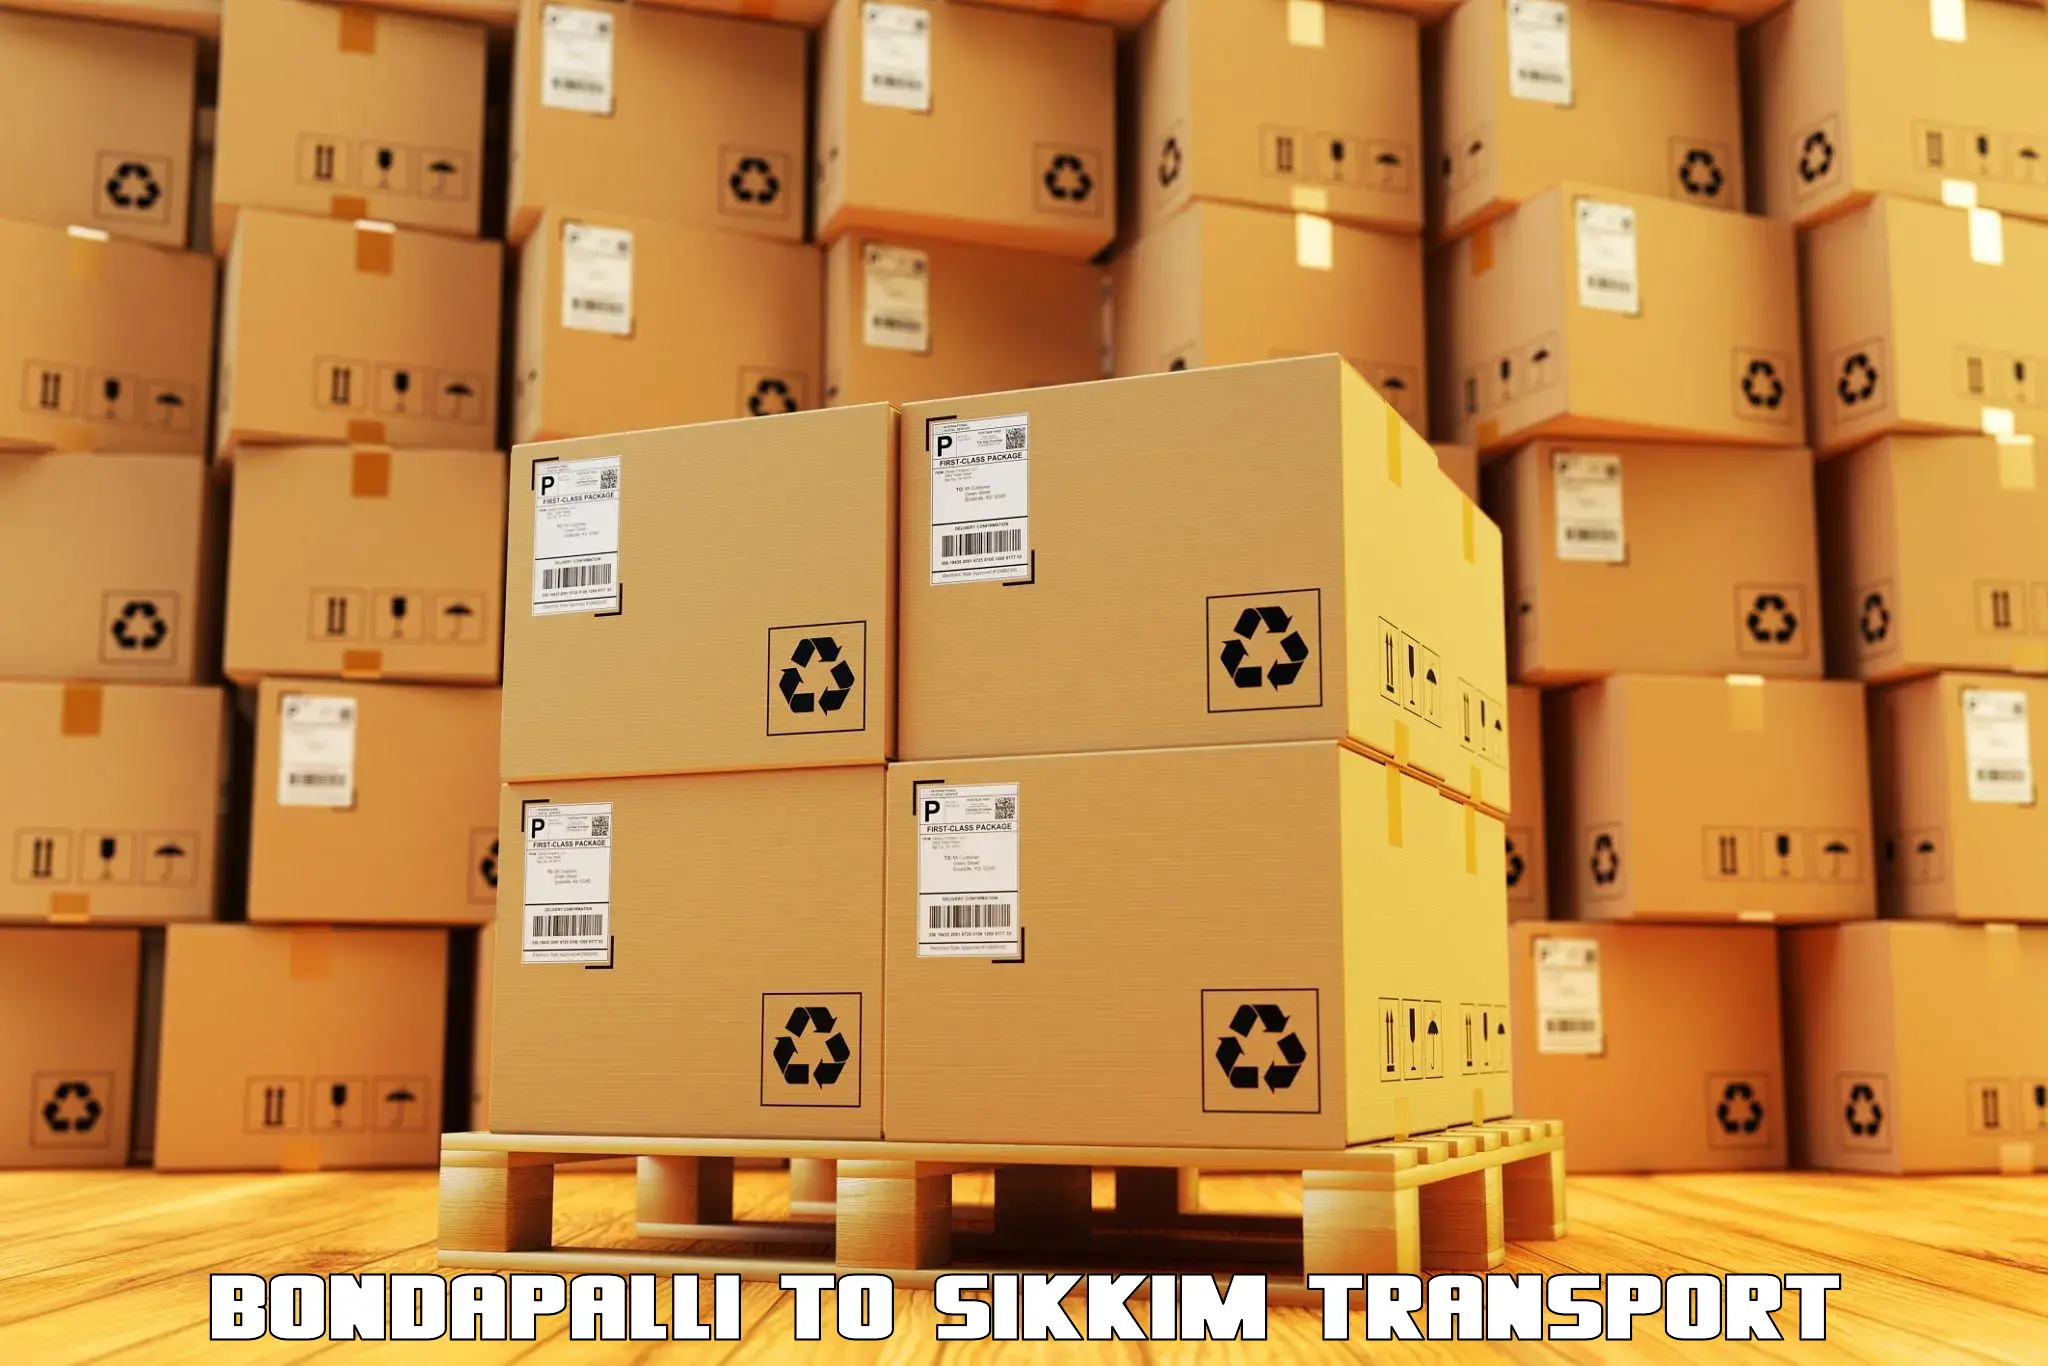 Express transport services in Bondapalli to Ranipool